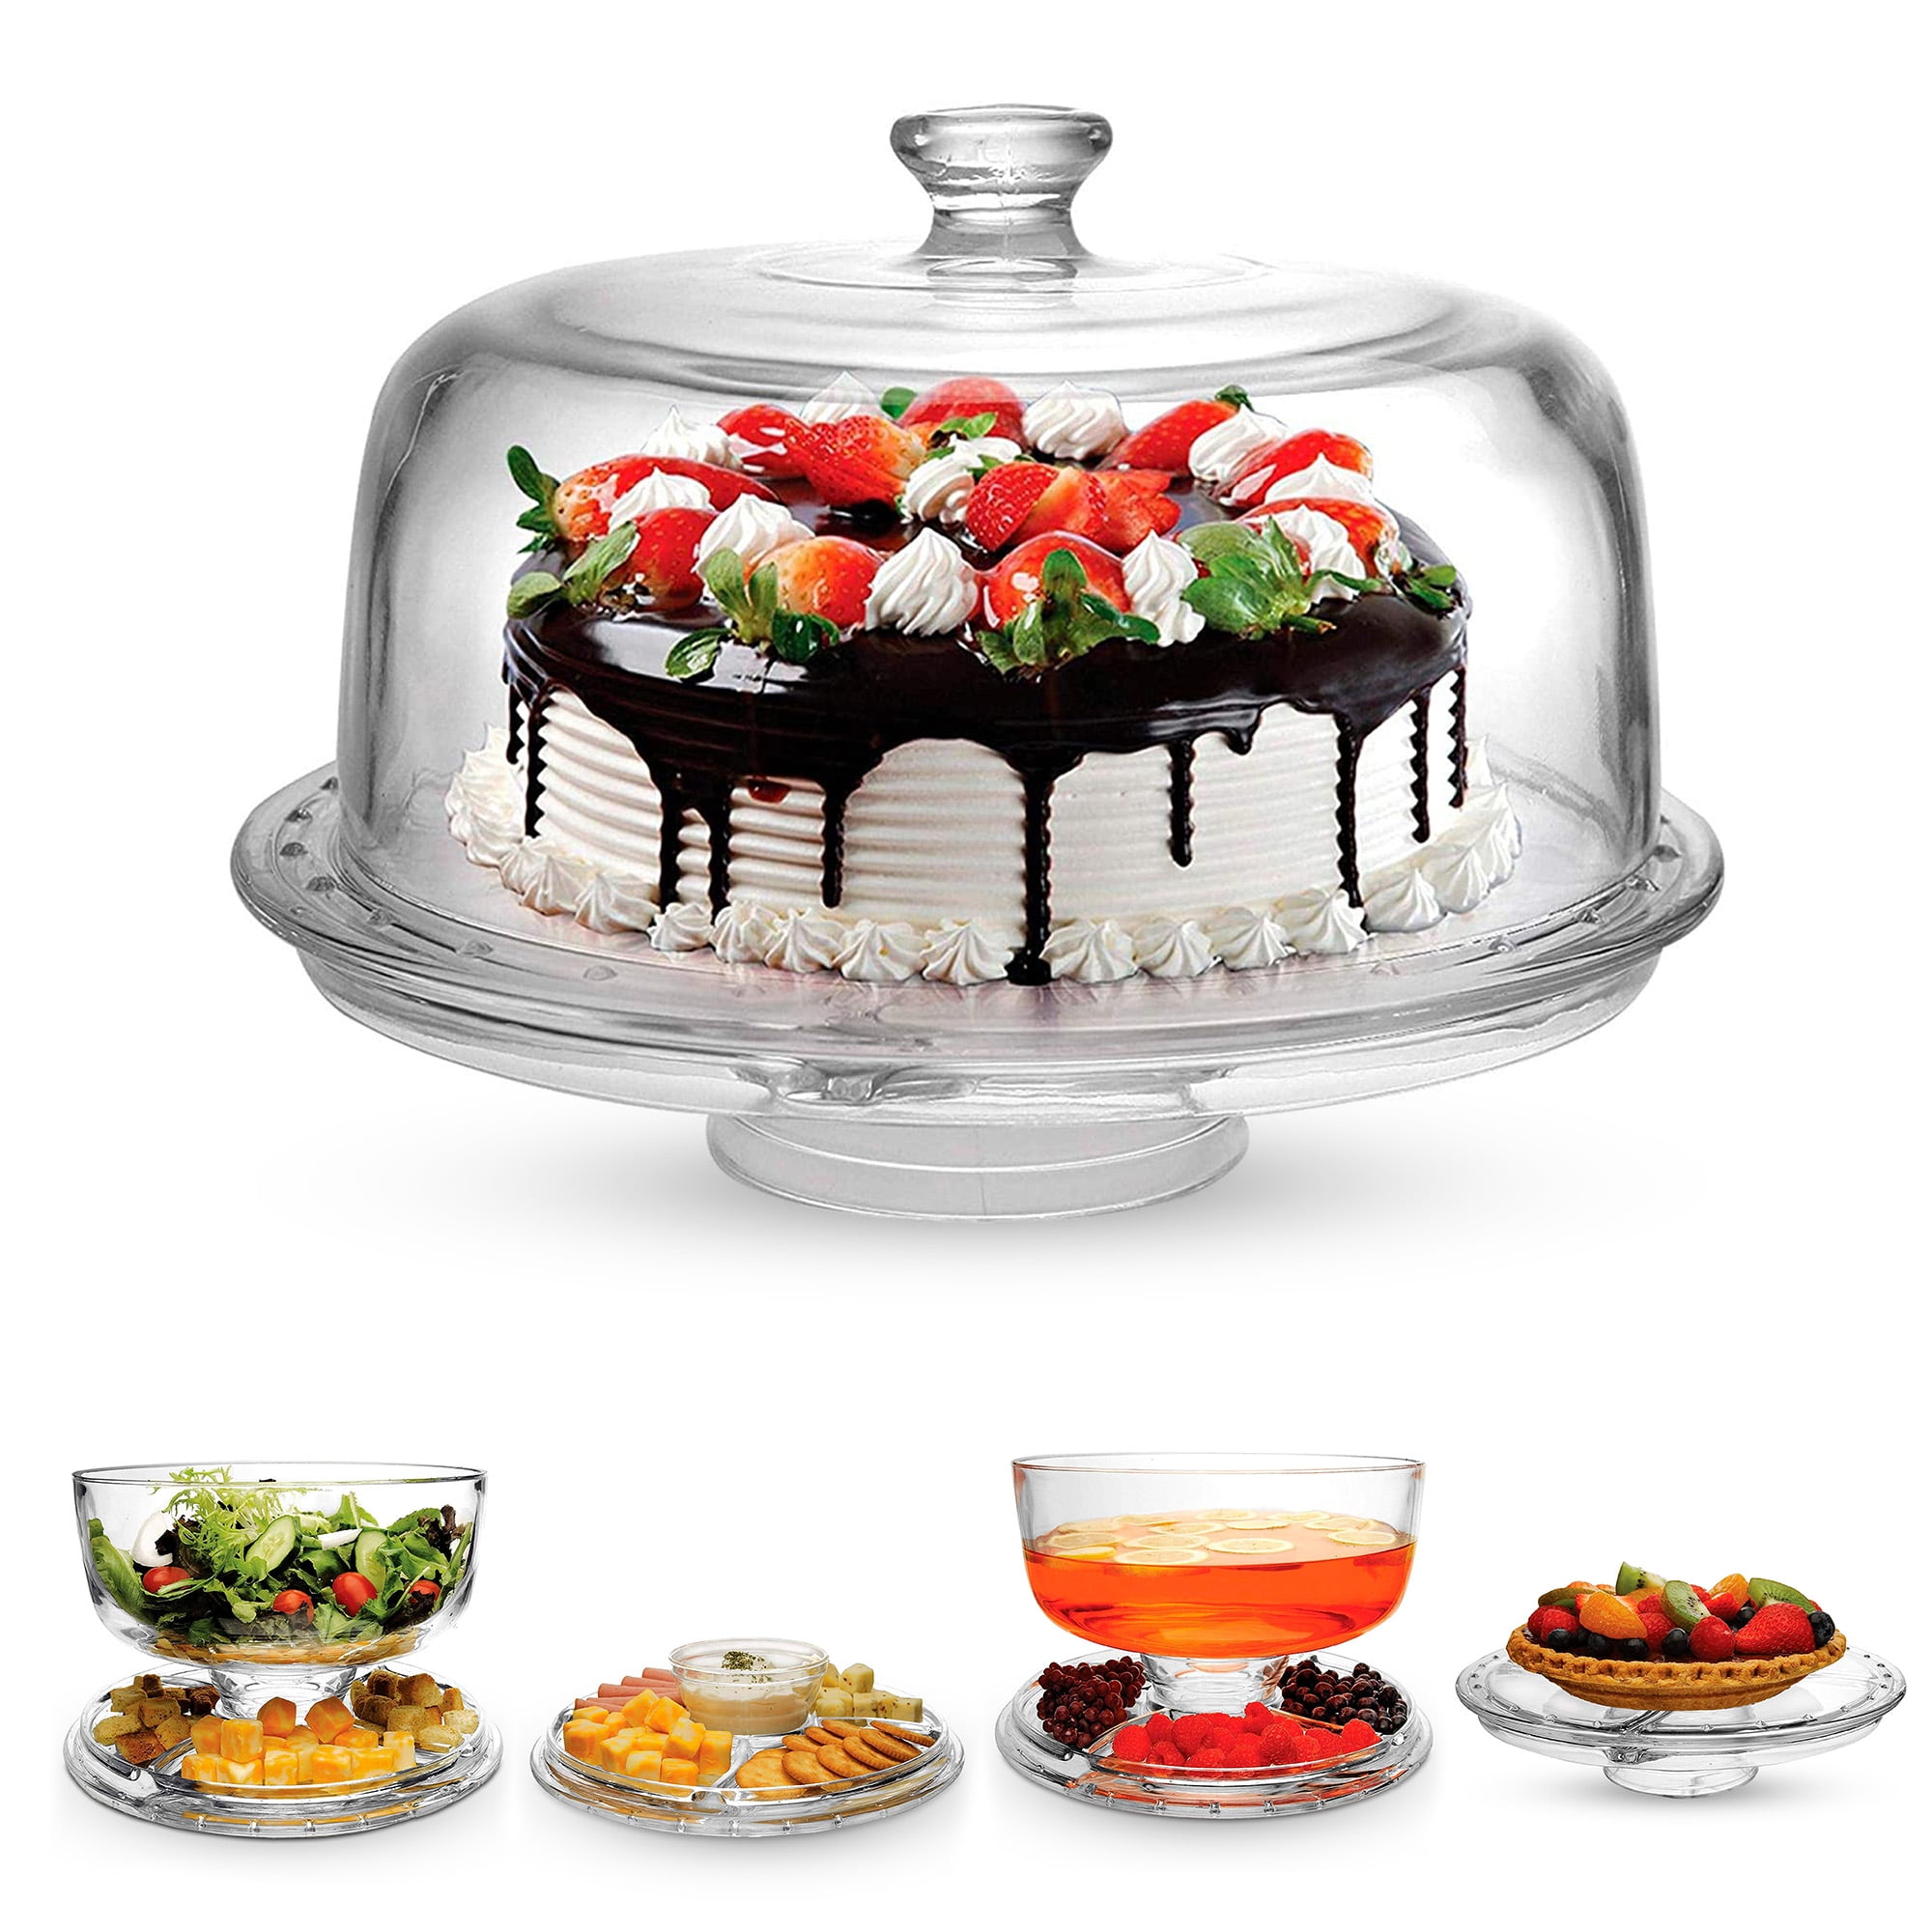 Twine Melamine Cake Stand, Cupcake Display, Home Decor Food and Dessert  Serving Accessory, 11.5 x 8 Inches, White, Set of 1 - Walmart.com